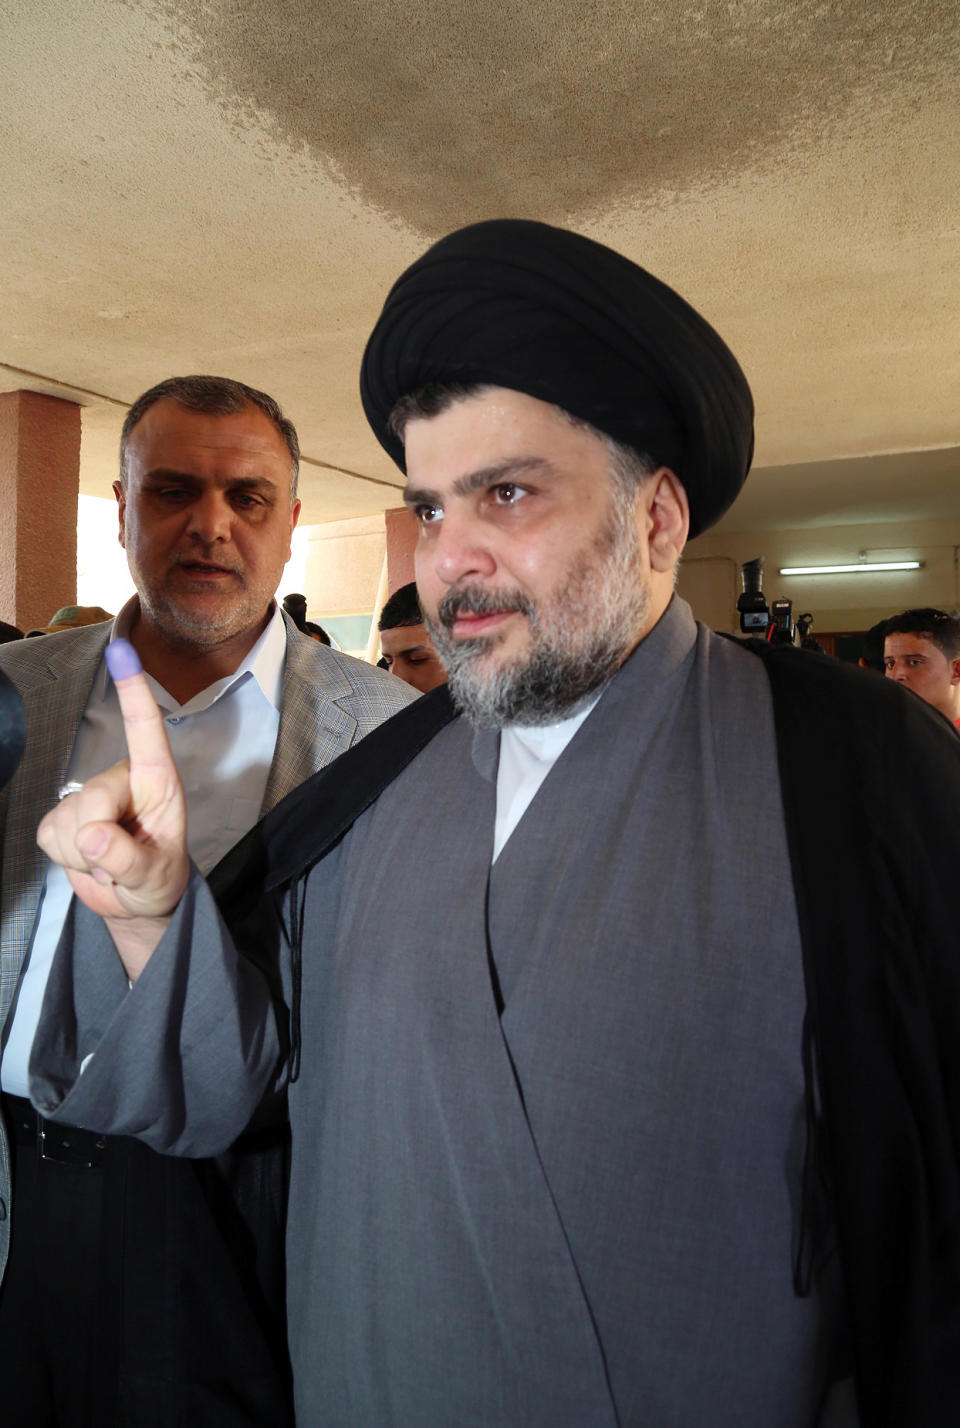 Shiite cleric Muqtada al-Sadr shows an ink-stained finger after casting his vote at a polling station in the Shiite holy city of Najaf, 100 miles (160 kilometers) south of Baghdad, Iraq, Wednesday, April 30, 2014. Iraq is holding its third parliamentary elections since the U.S.-led invasion that toppled dictator Saddam Hussein. More than 22 million voters are eligible to cast their ballots to choose 328 lawmakers out of more than 9,000 candidates. (AP Photo/Jaber al-Helo)